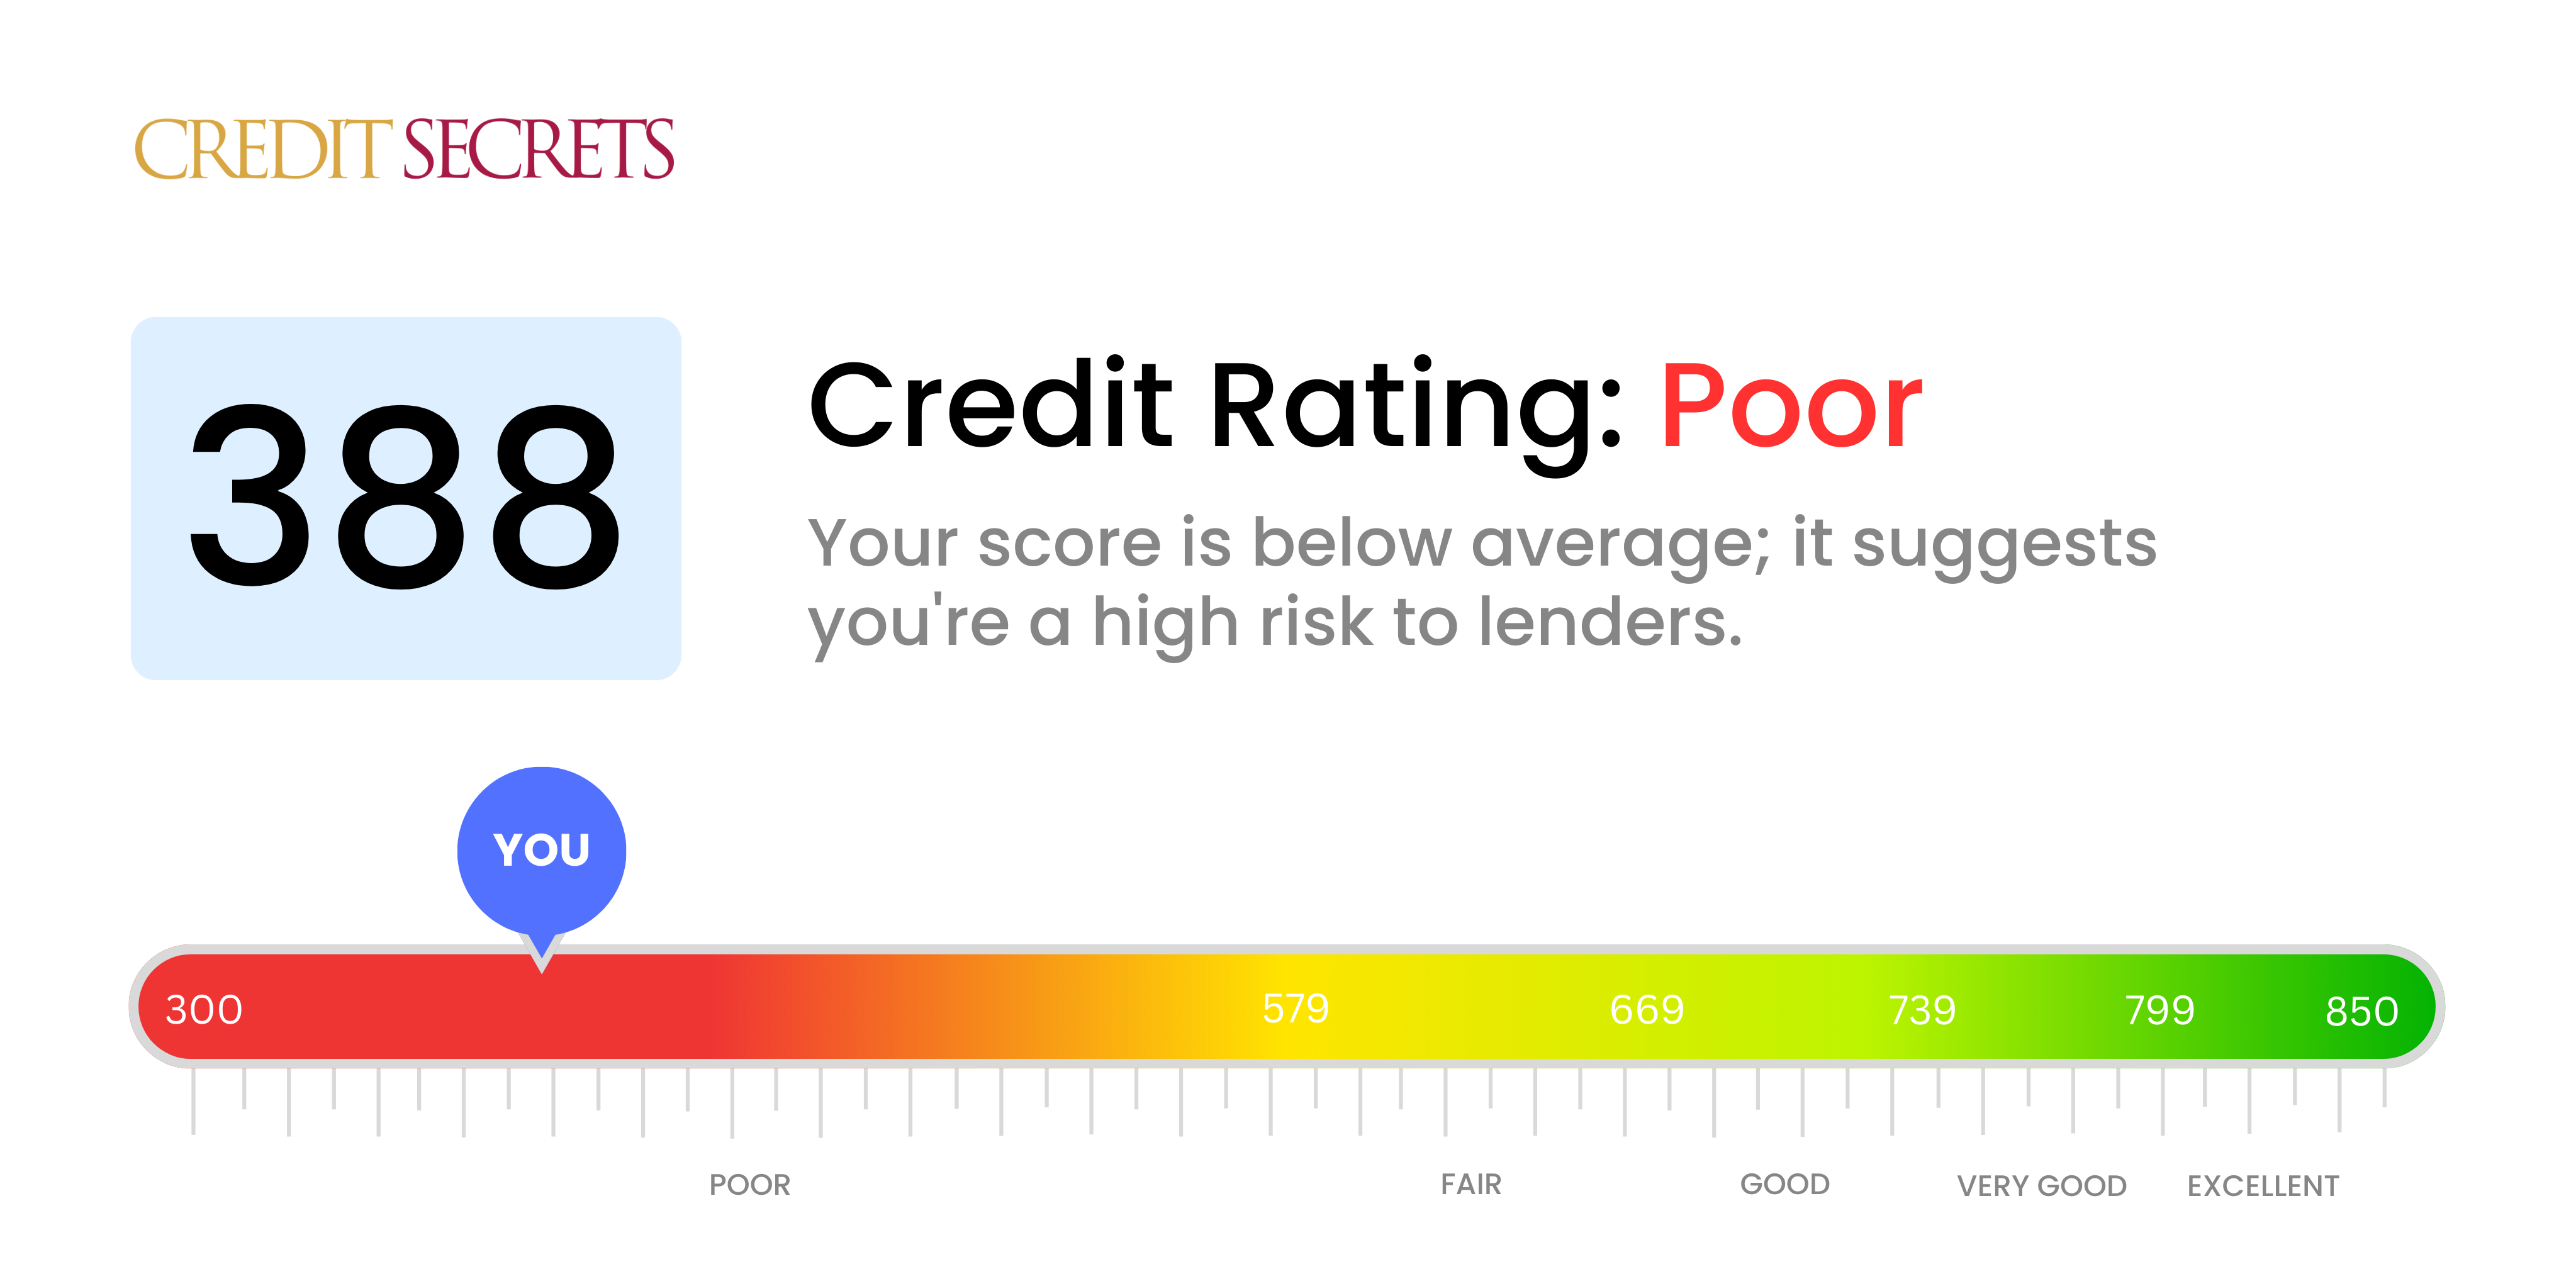 Is 388 a good credit score?